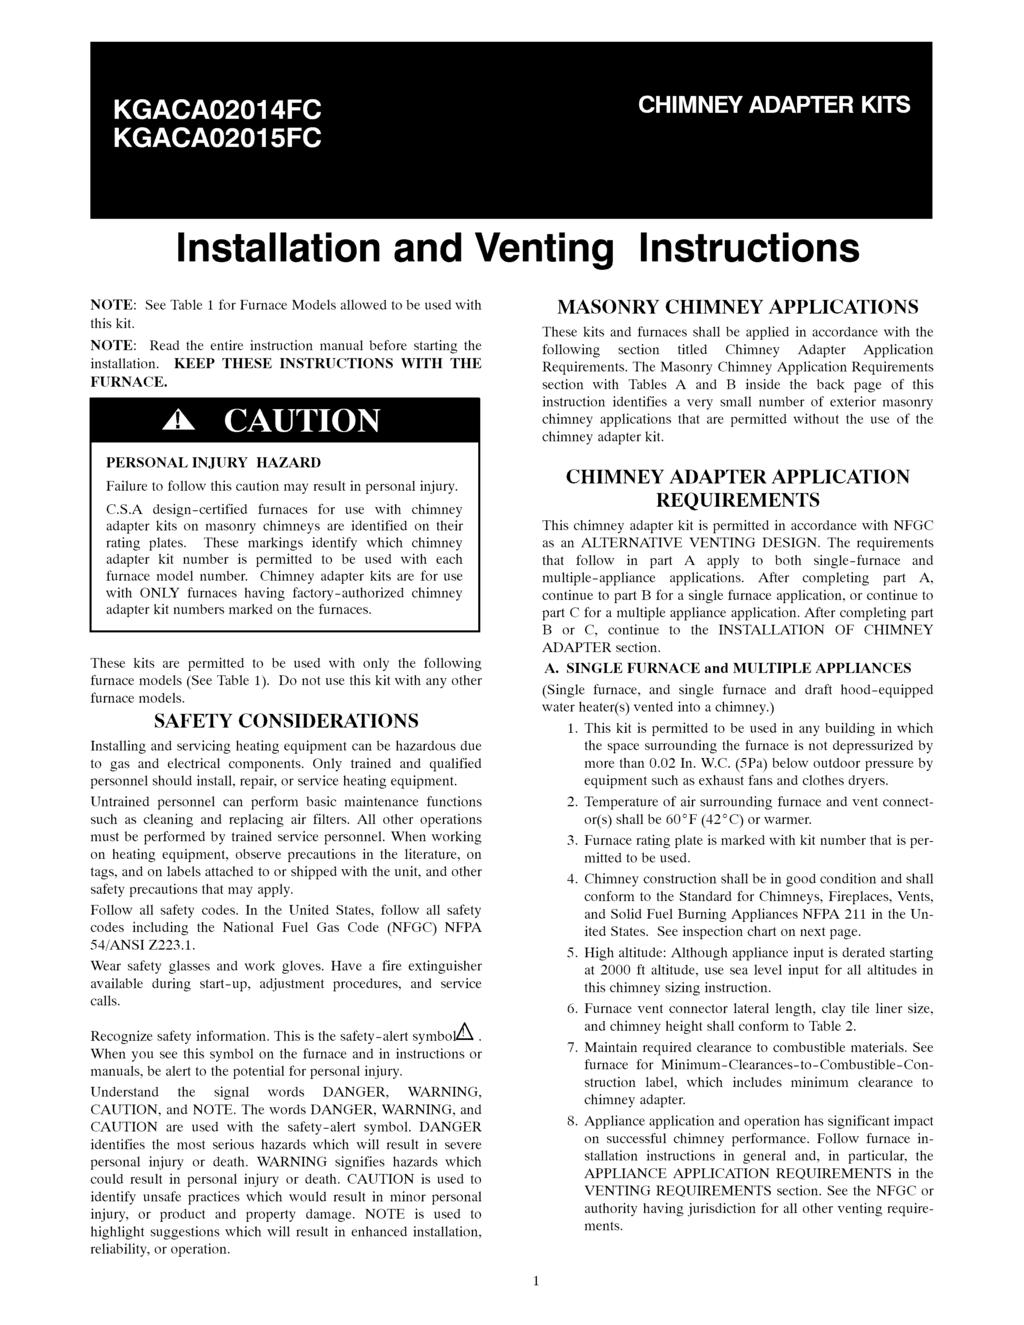 Installation and Venting Instructions NOTE: See Table 1 for Furnace Models allowed to be used with this kit. NOTE: Read the entire instruction manual before starting the installation.